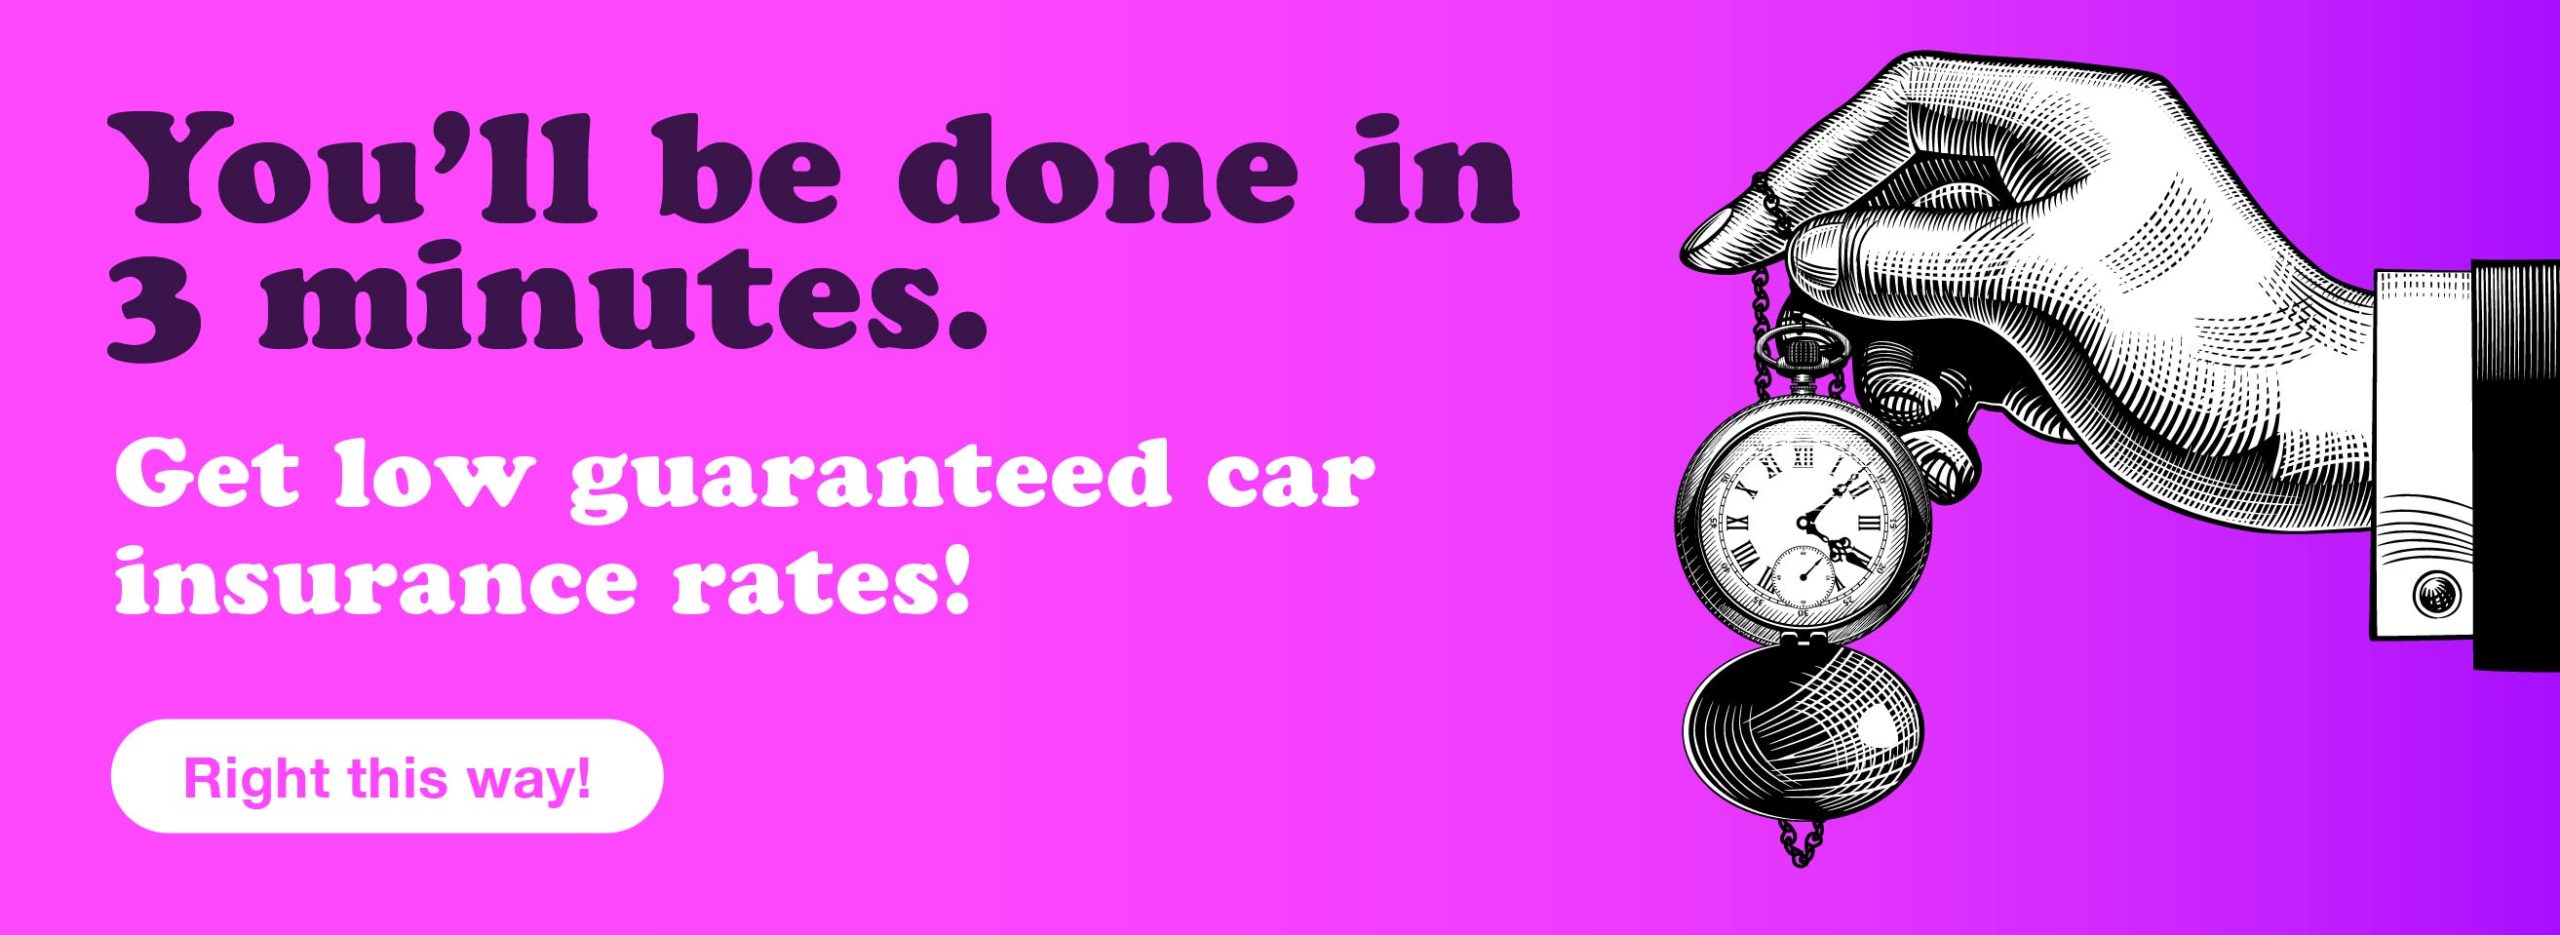 You'll be done in 3 minutes. Get low guaranteed car insurance rates! Right this way!